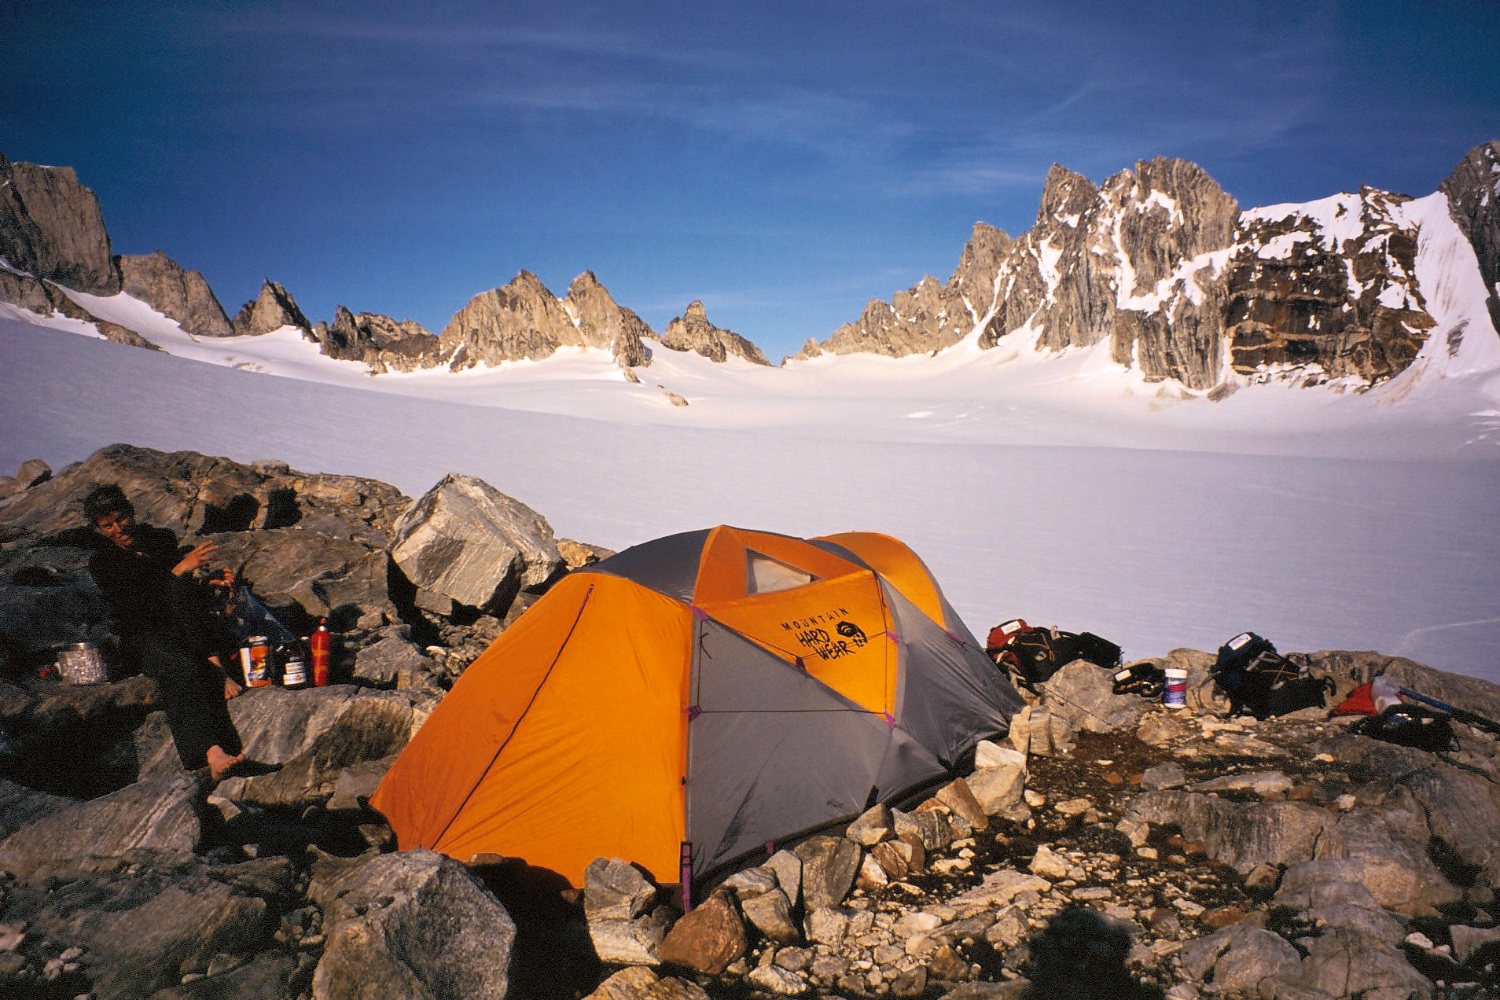  Our camp on a rocky outcrop near the head of a snow basin - the Col de Phantome is behind 